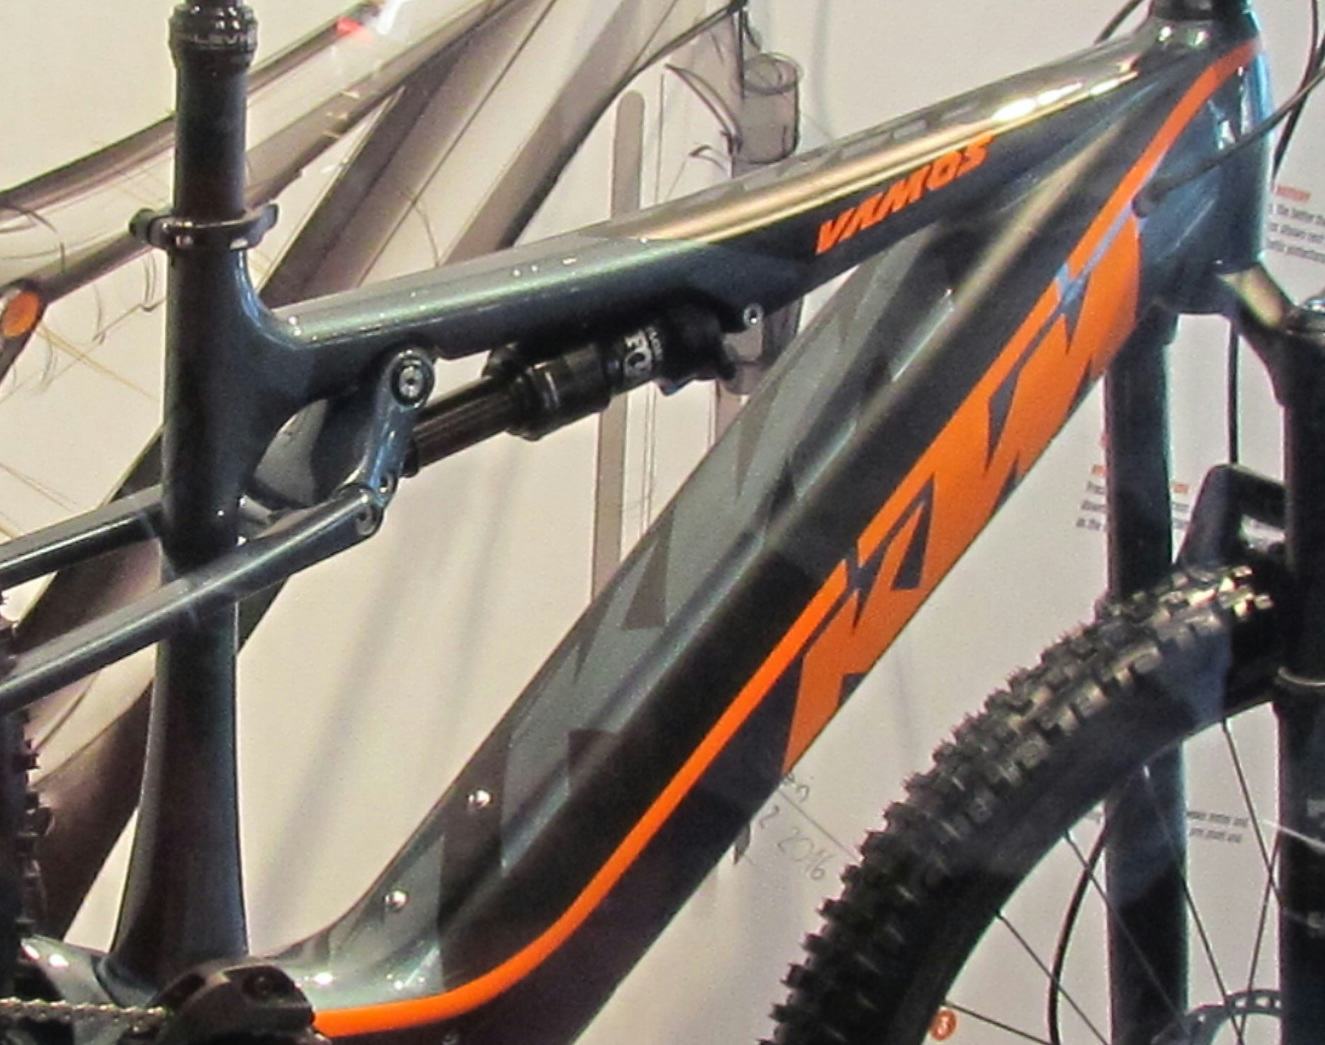 KTM Fahrrad GmbH initiated legal measures in Germany and Austria against Pexco GmbH for usage of KTM keyword by Pexco. – Photo Bike Europe 